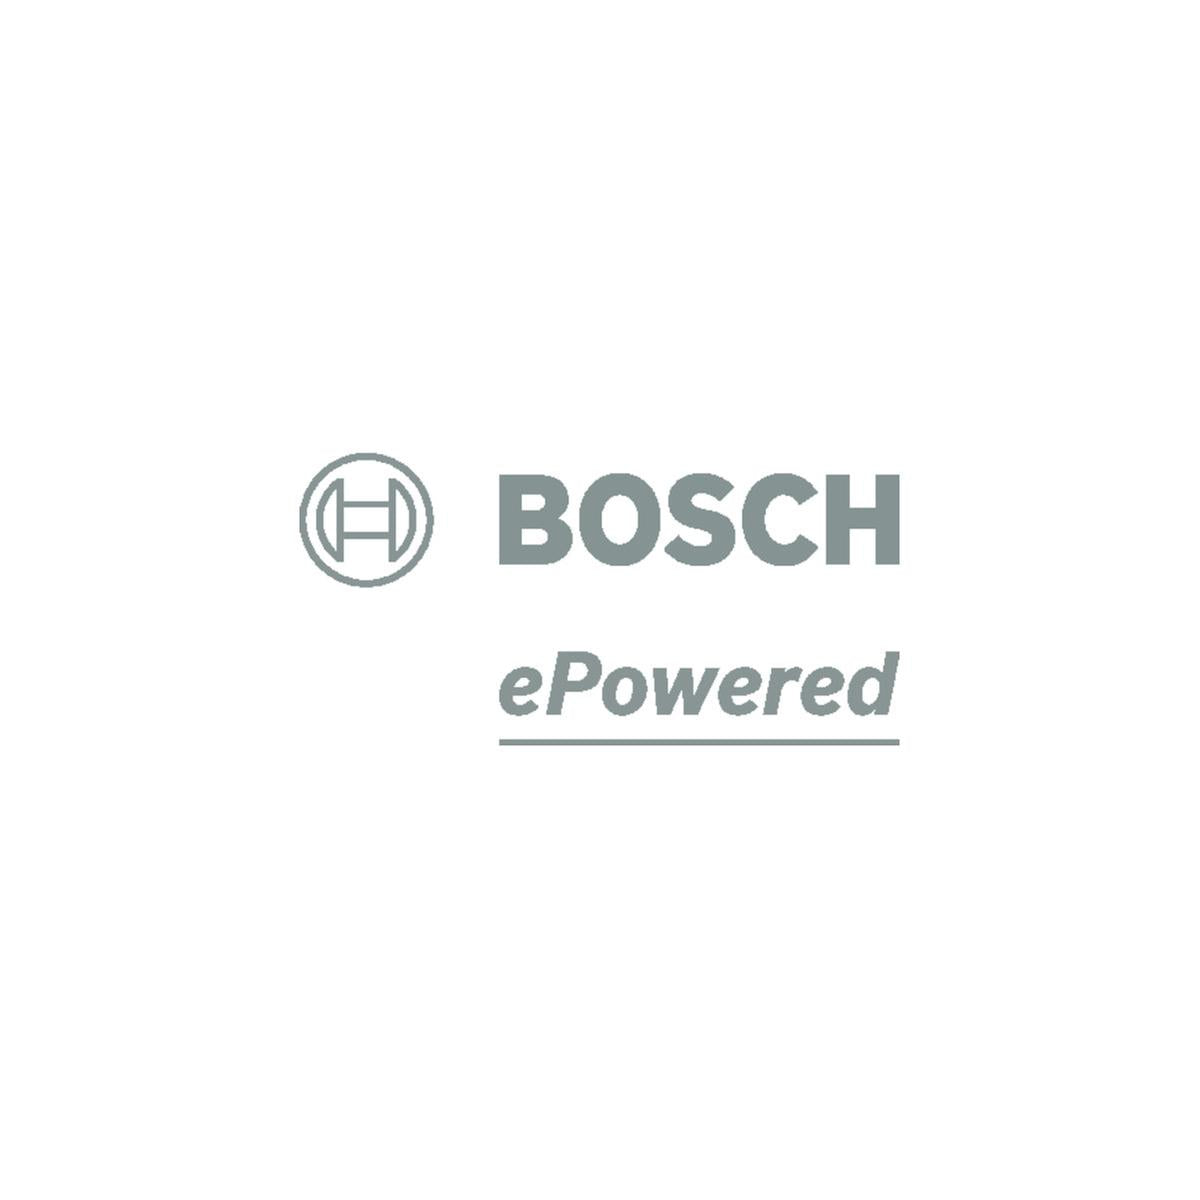 BOSCH PowerMore - cable laid away from the battery holder. 50mm BCH3925 50